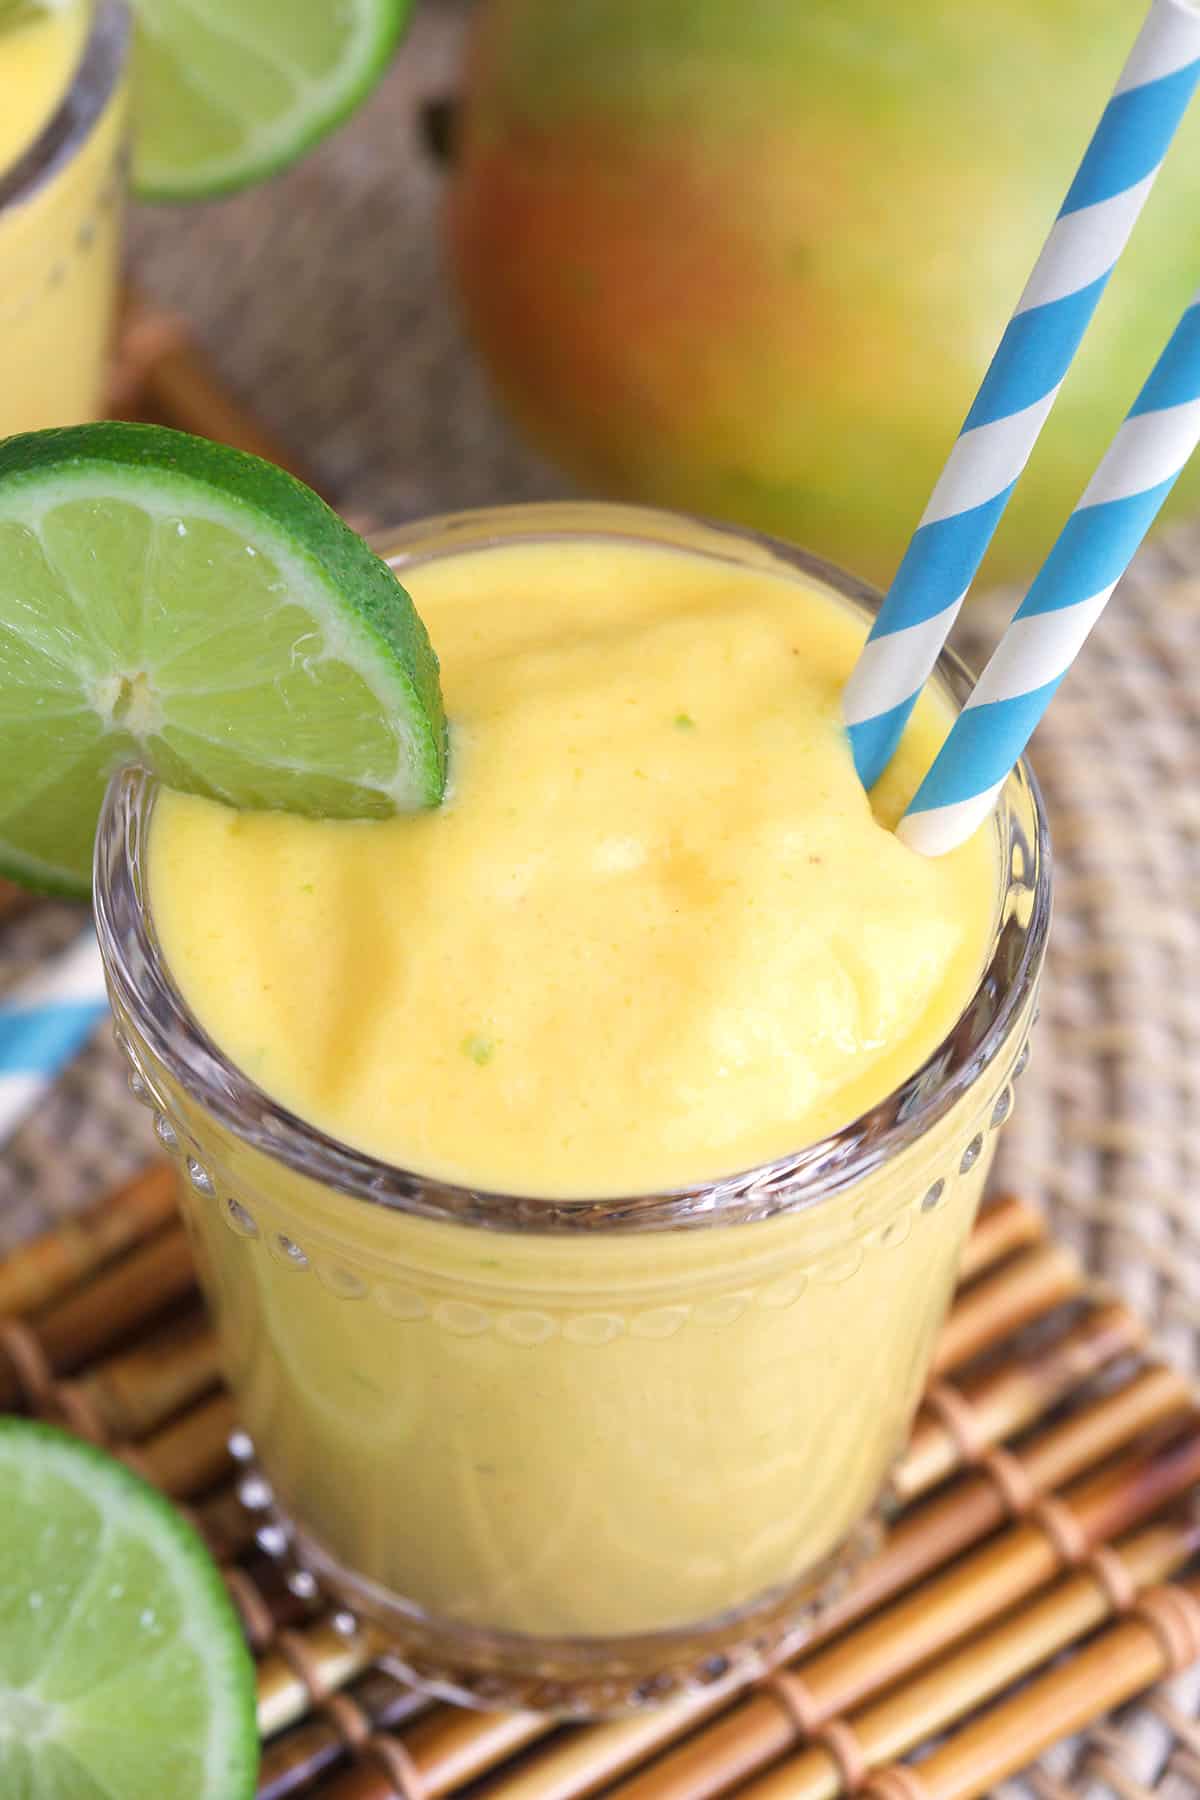 Creamy Mango Smoothie in a glass with a lime slice on the side and two blue and white striped straws. Glass is placed on top of a bamboo coaster.